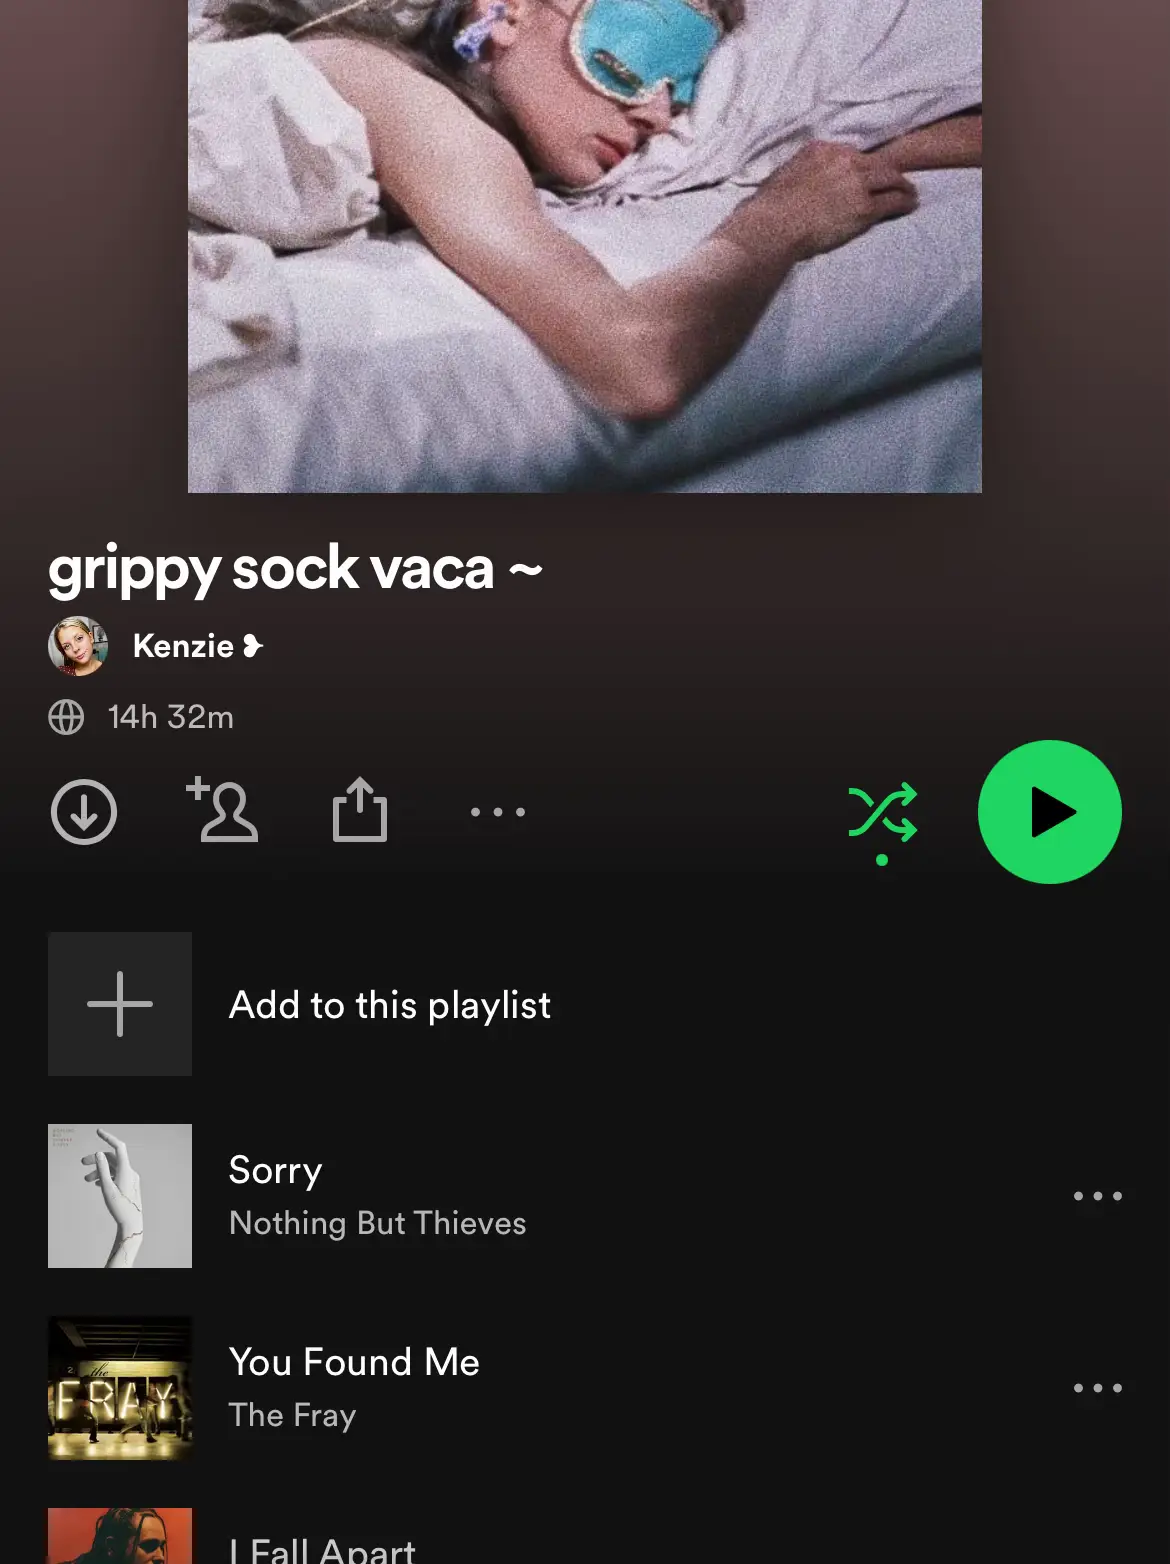  A playlist of music with the words "Add to this playlist" and "Sorry Nothing But Thieves You Found Me"